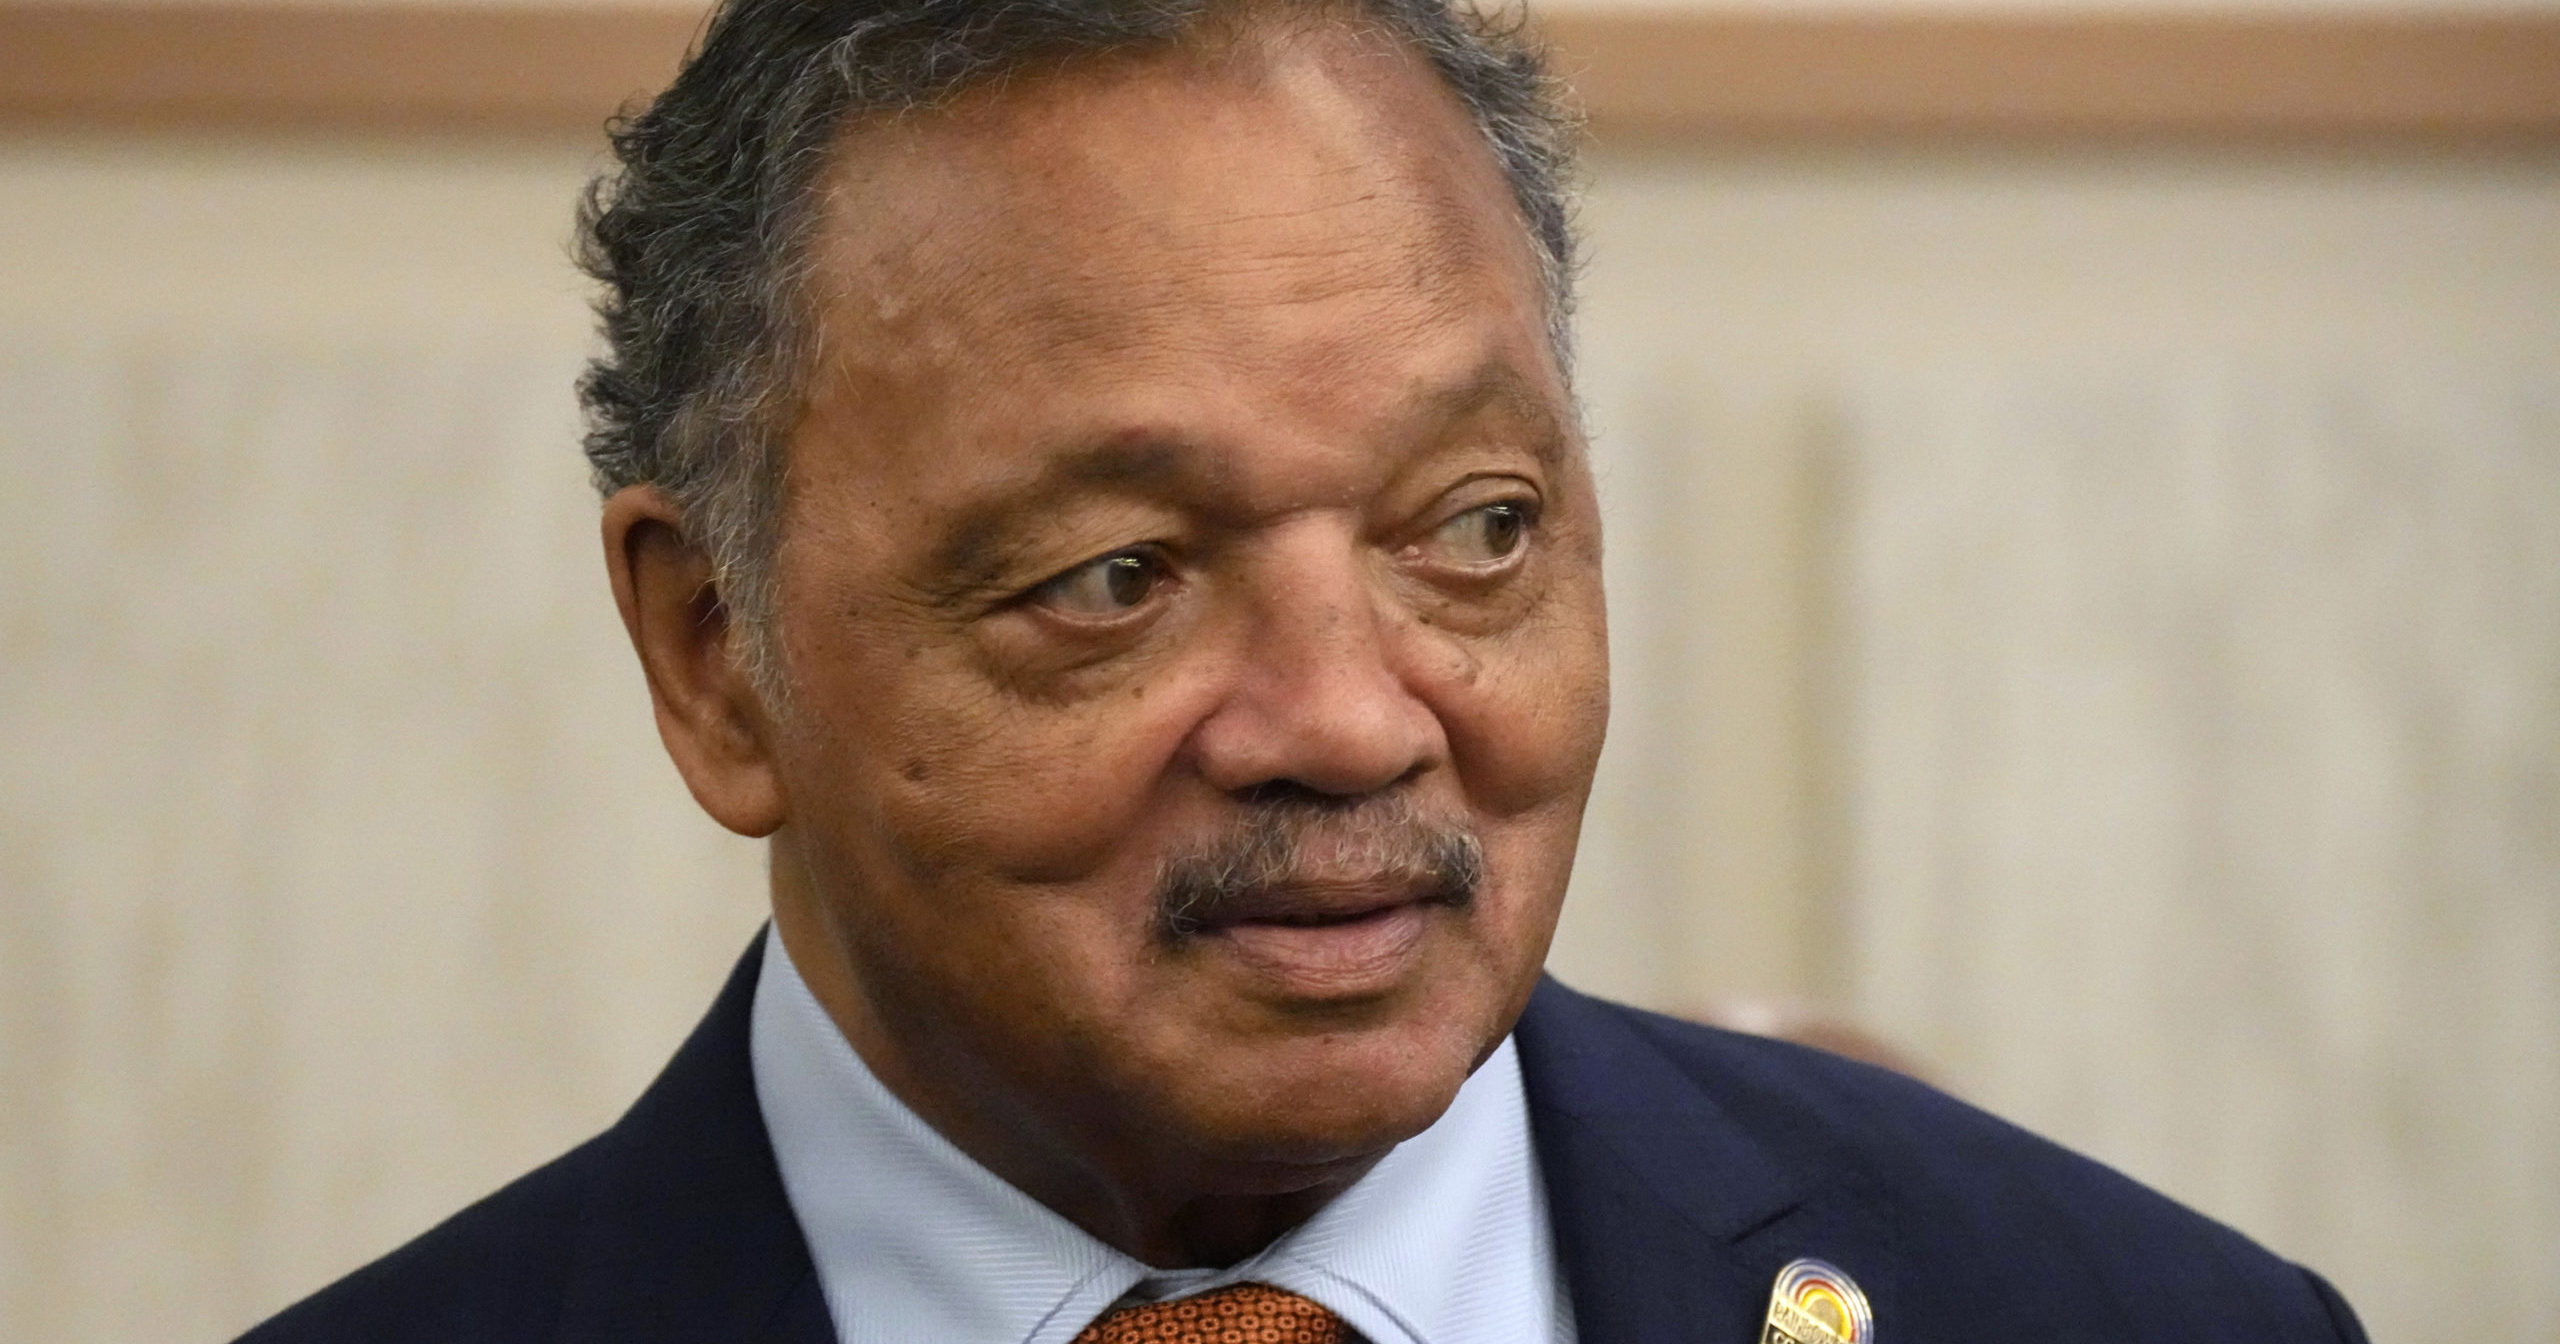 The Rev. Jesse Jackson speaks to attendees at the inaugural Sunday Dinner event, hosted by the South Carolina Democratic Party's Black Caucus, in Columbia on March 27, 2022.